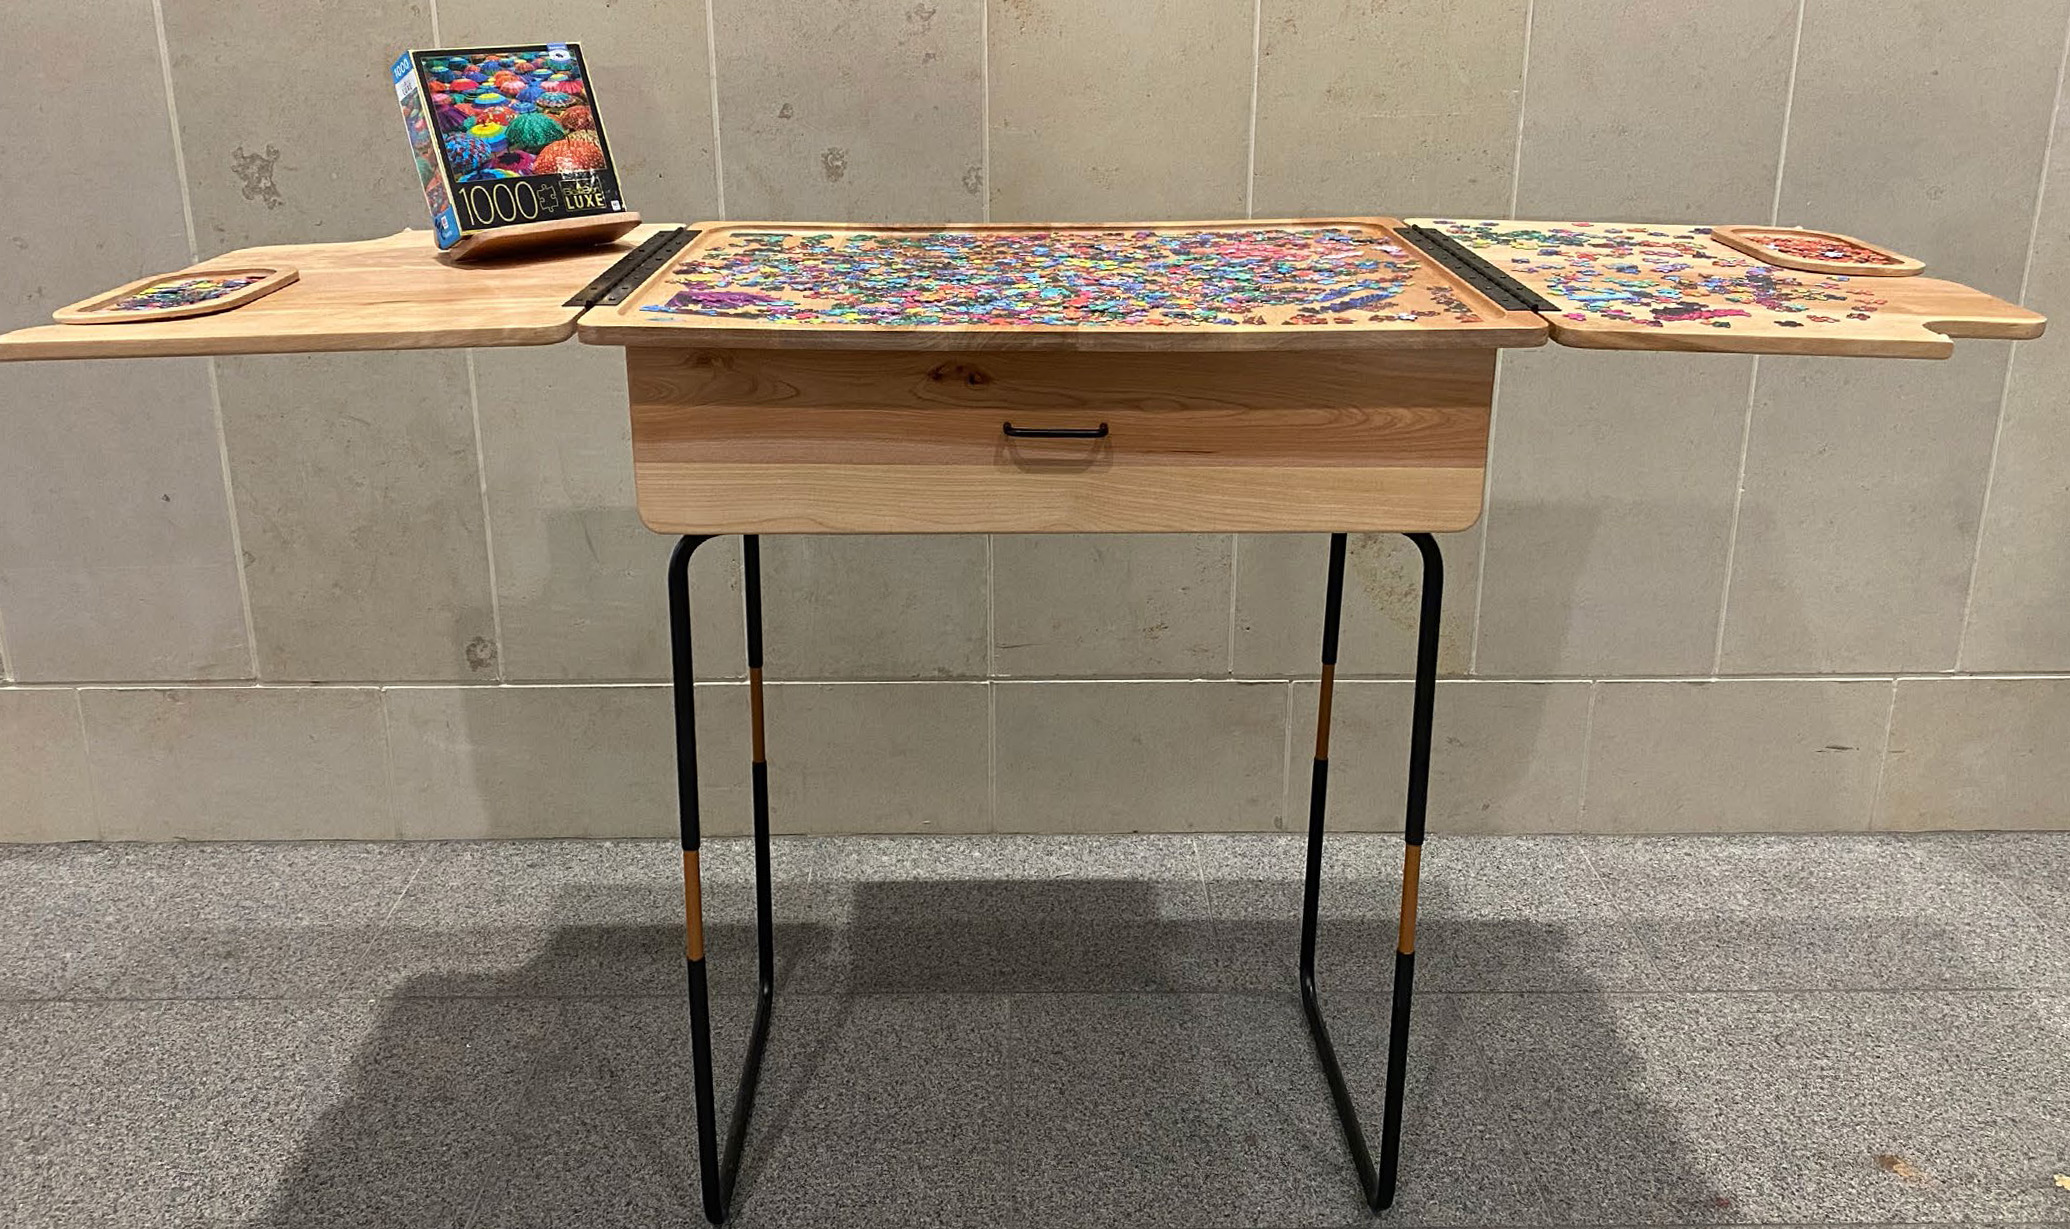 puzzle table unfolded